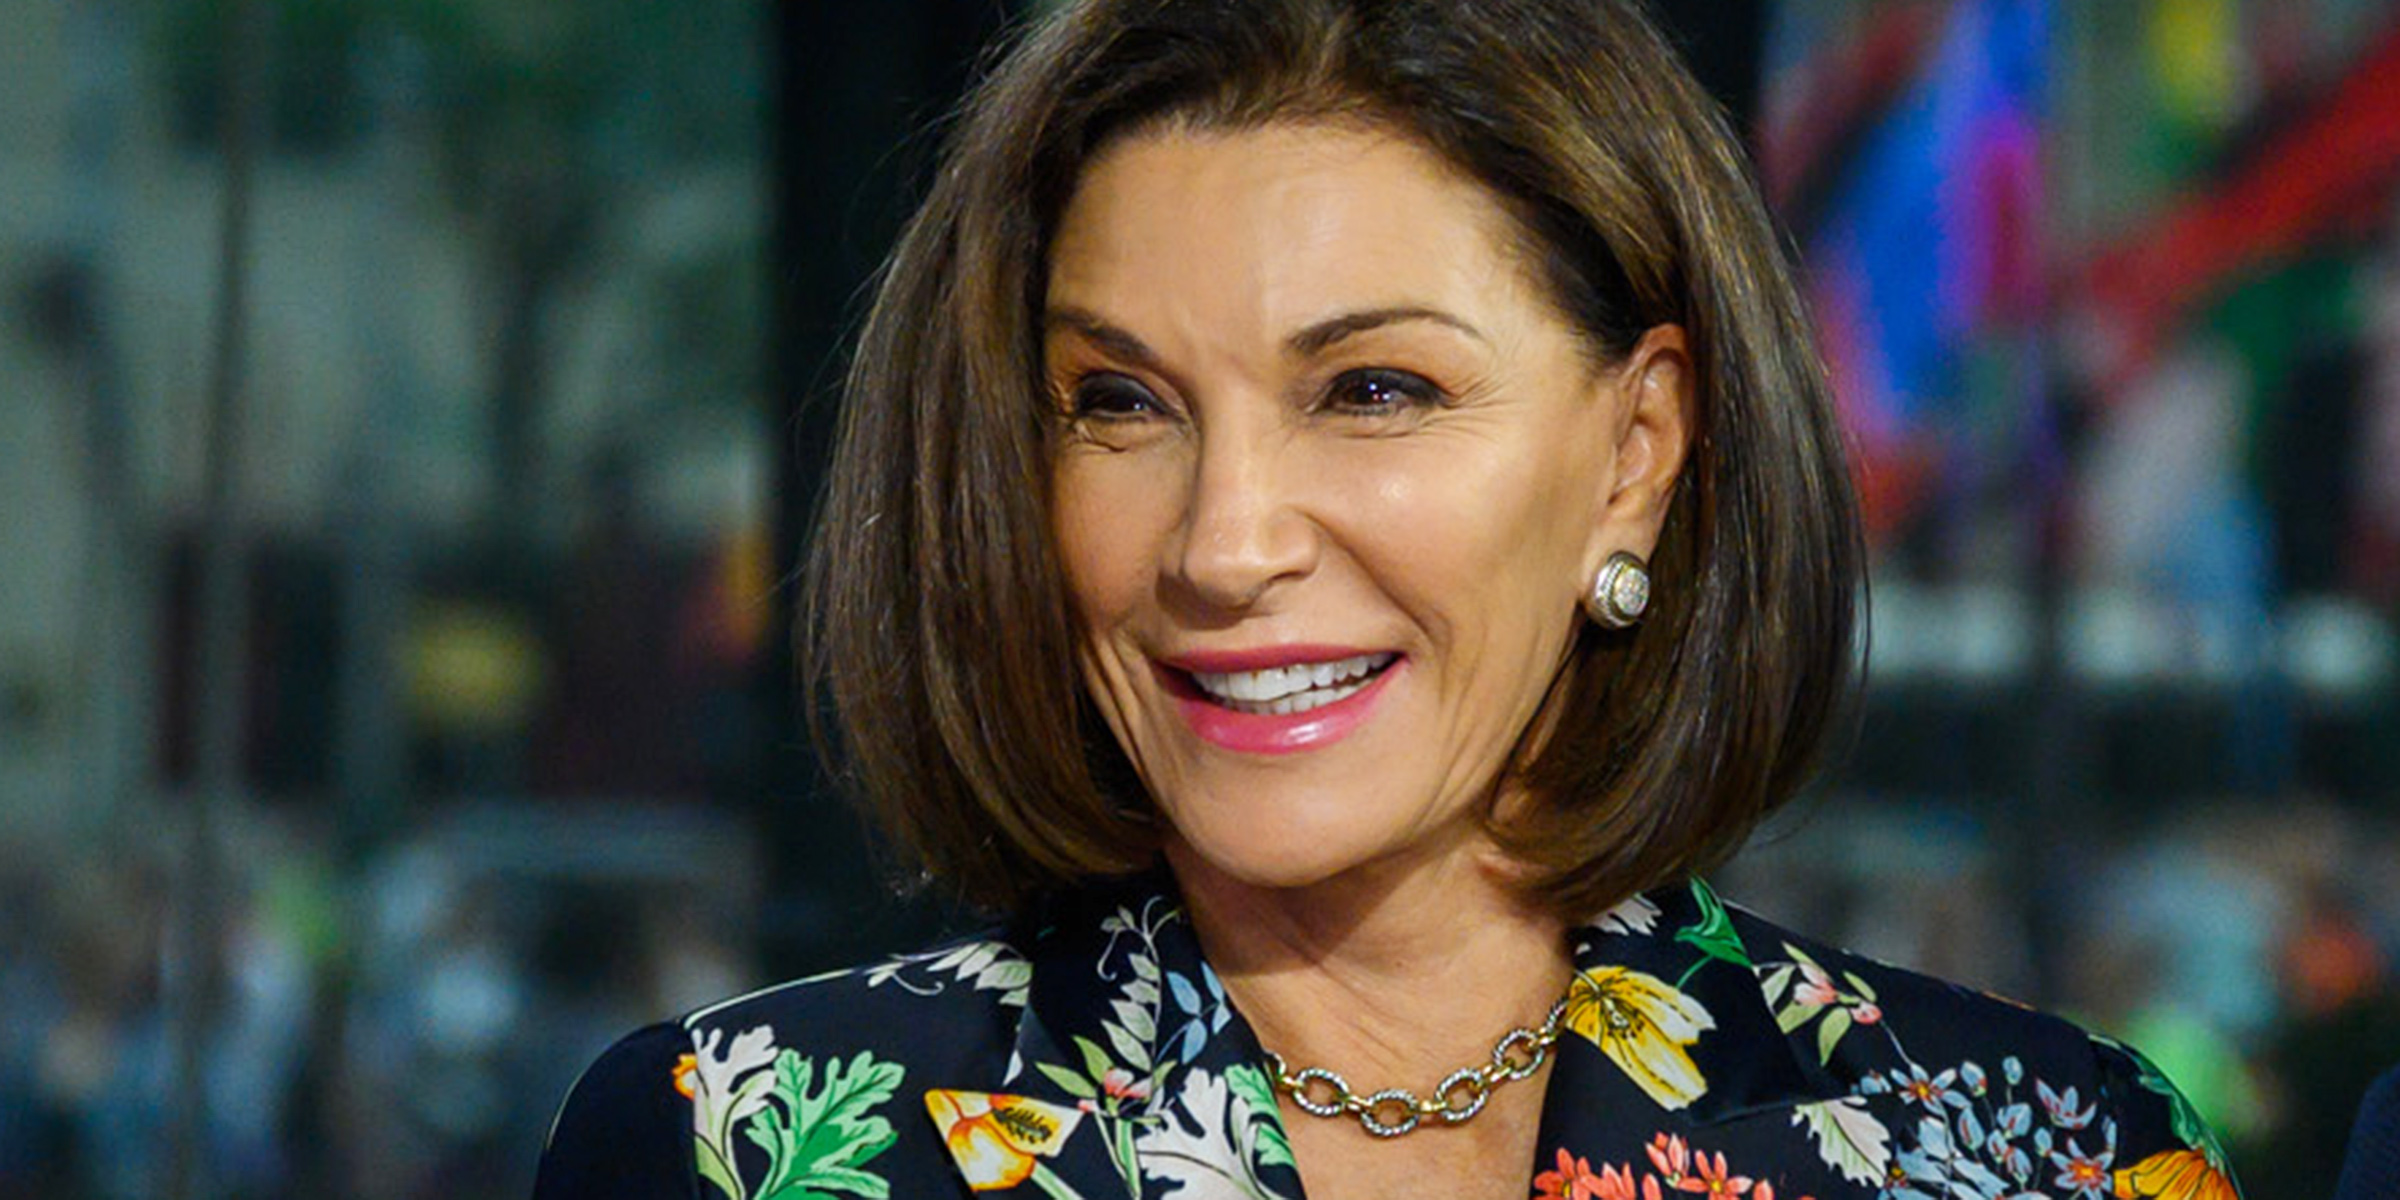 how old is hilary farr